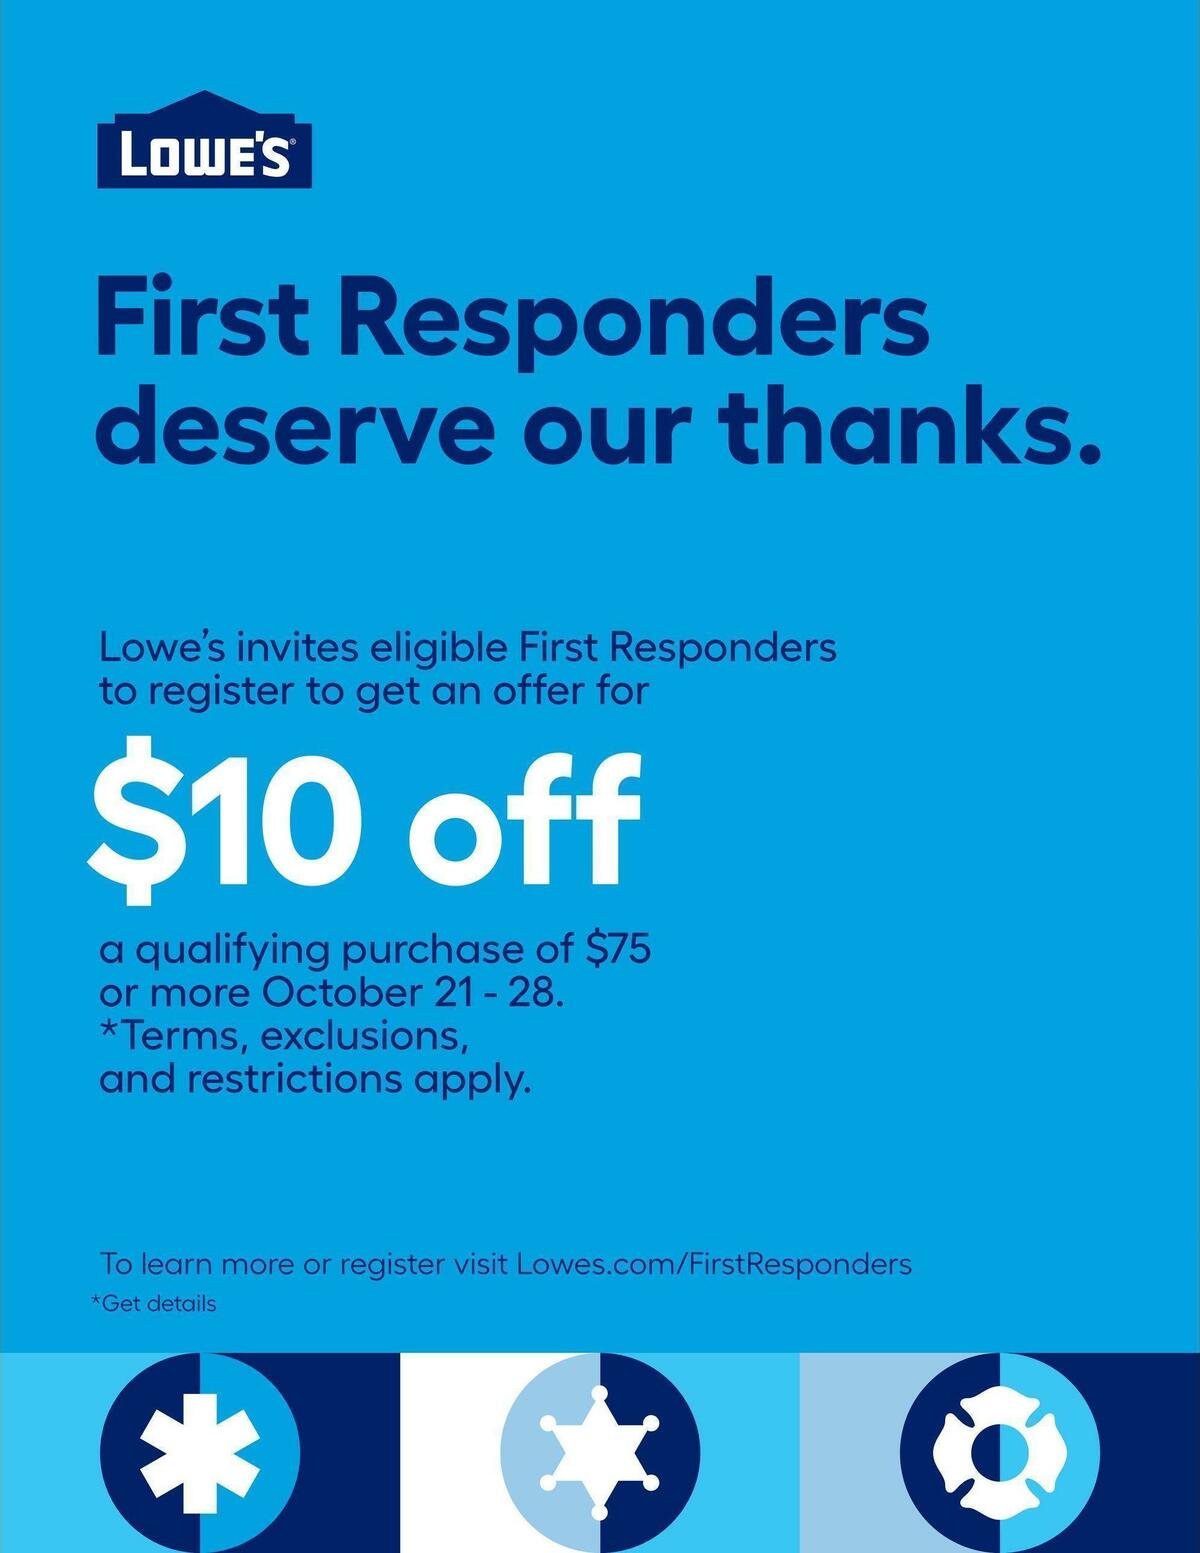 Lowe's Weekly Ad from October 13